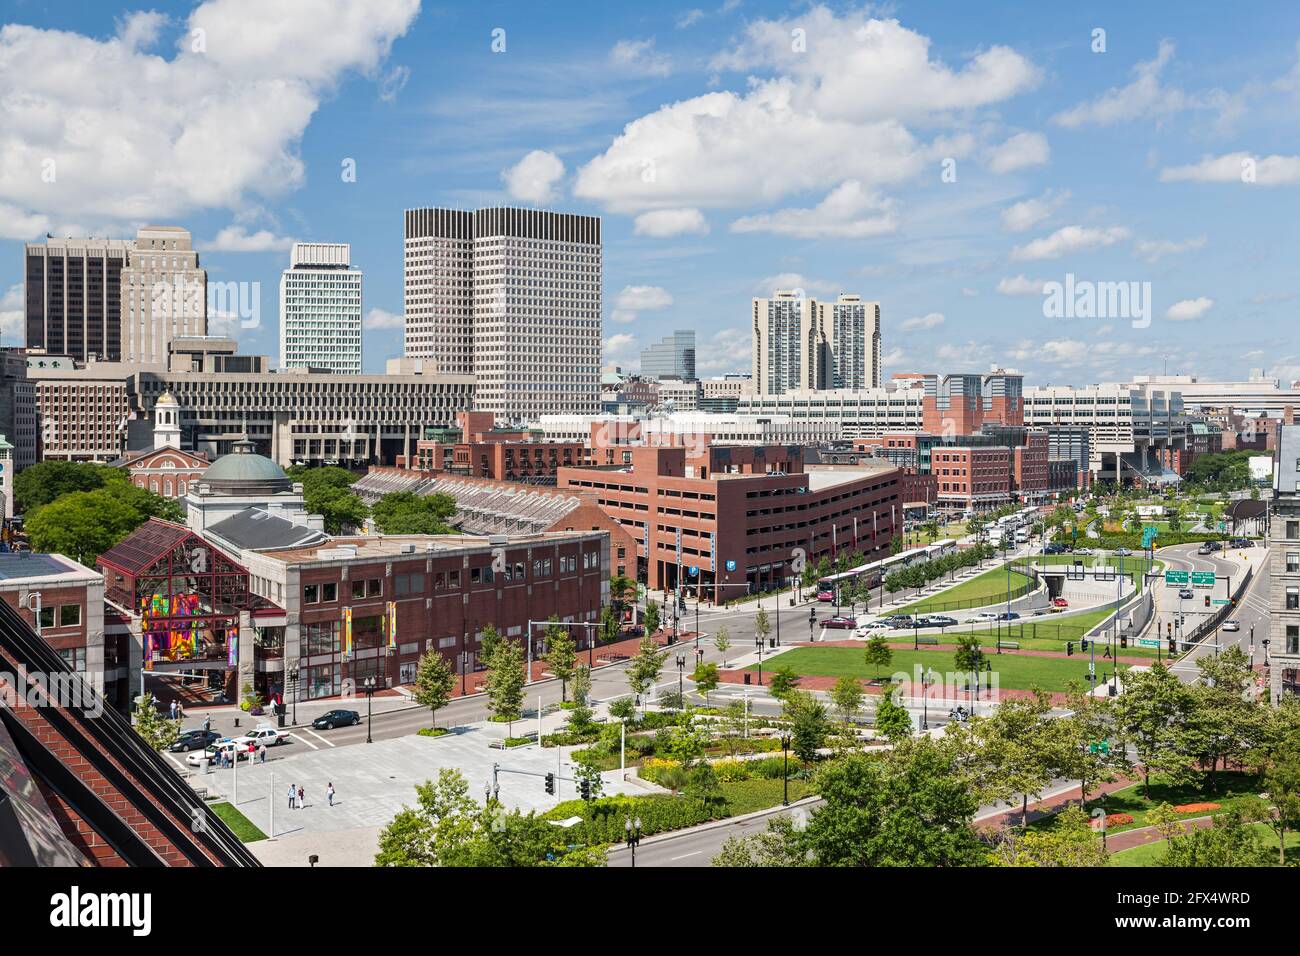 Faneuil Hall and Marketplace Center, Rose Kennedy Greenway Park, Boston, Massachusetts, États-Unis Banque D'Images